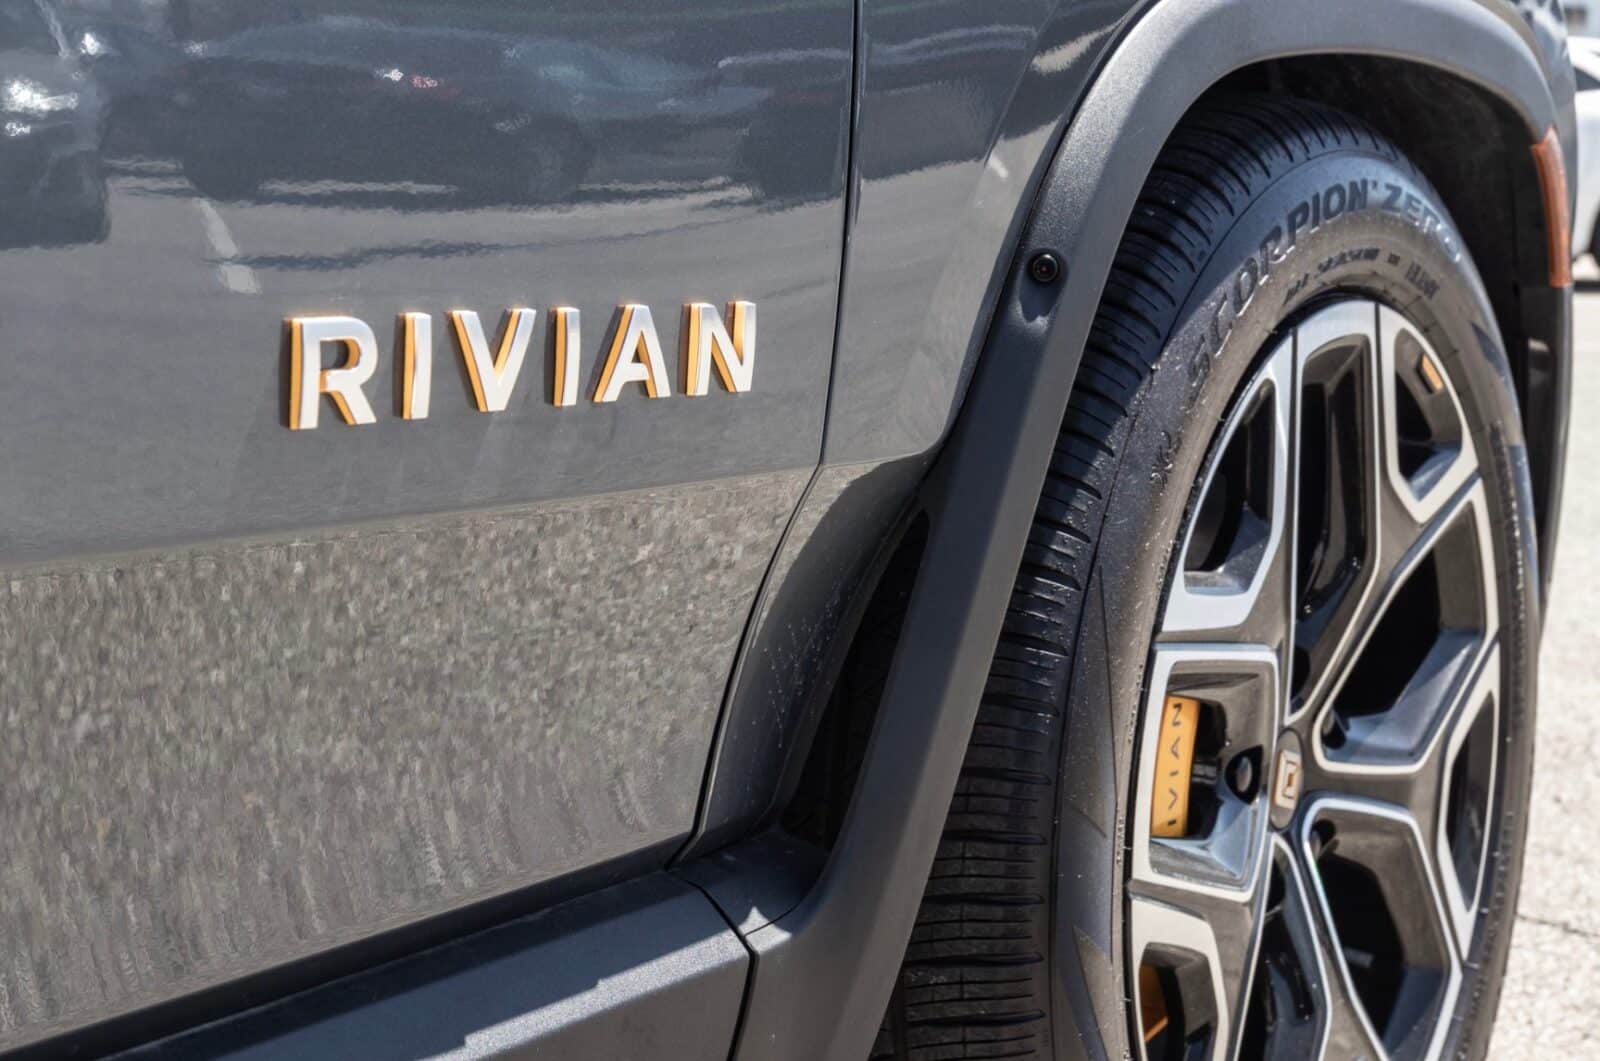 Rivian Expensive Journey To Carve A Niche In Electric Vehicles